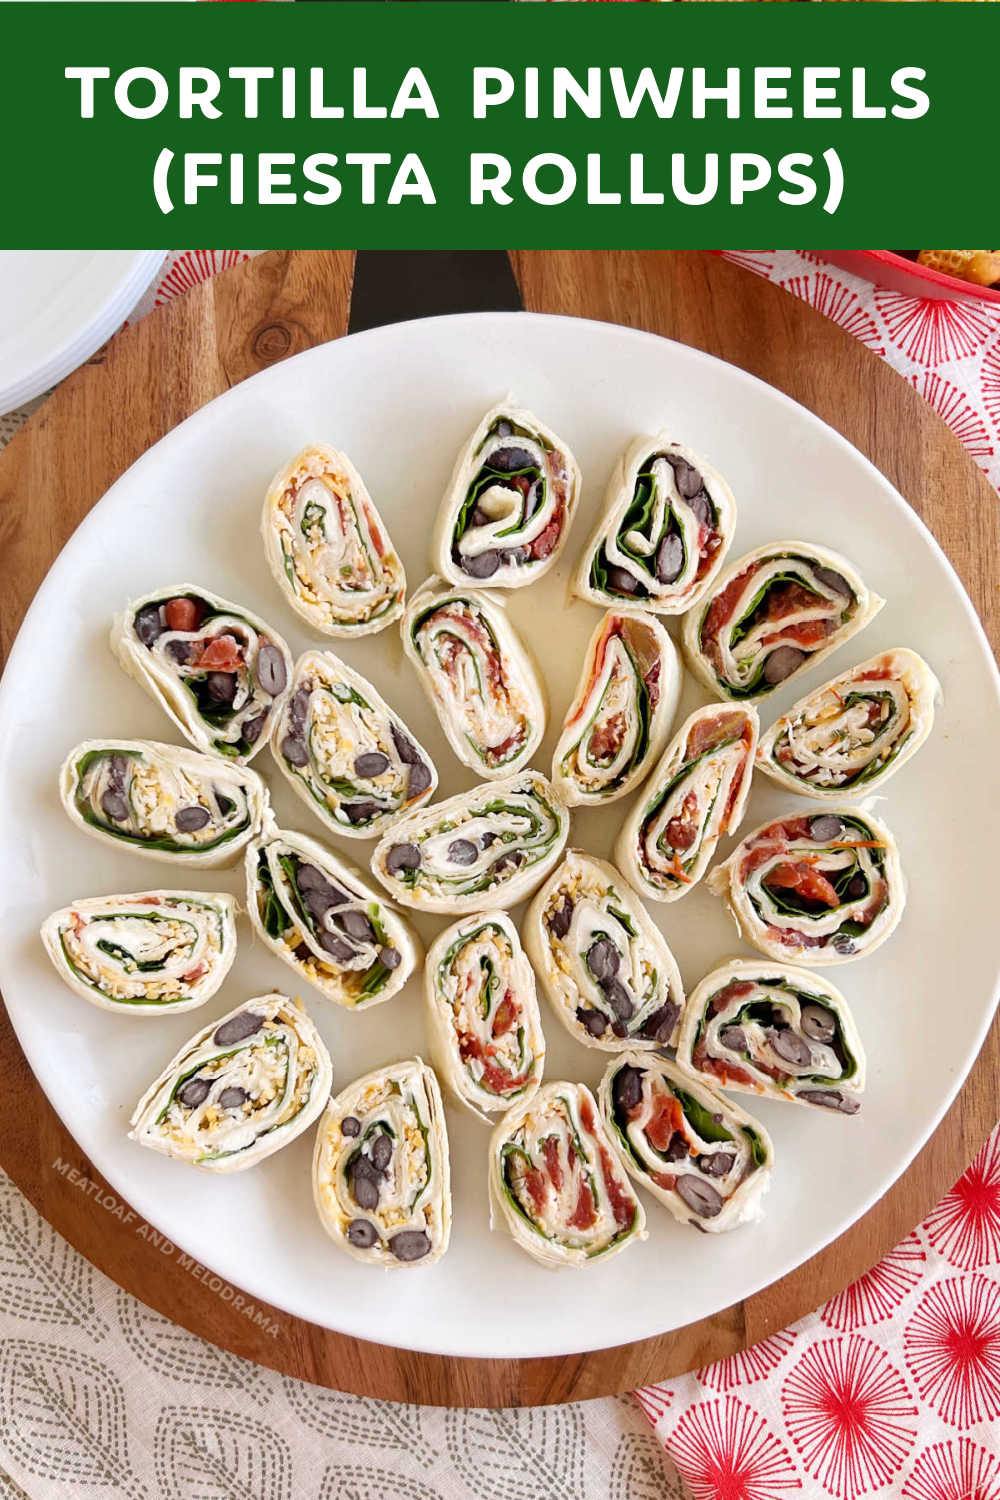 Tortilla Pinwheels (fiesta rollups) are easy appetizers made with tortillas filled with cream cheese, spinach, diced tomatoes and black beans. This delicious appetizer is perfect party food for holidays and game day and makes a healthy light lunch or after school snack!  via @meamel